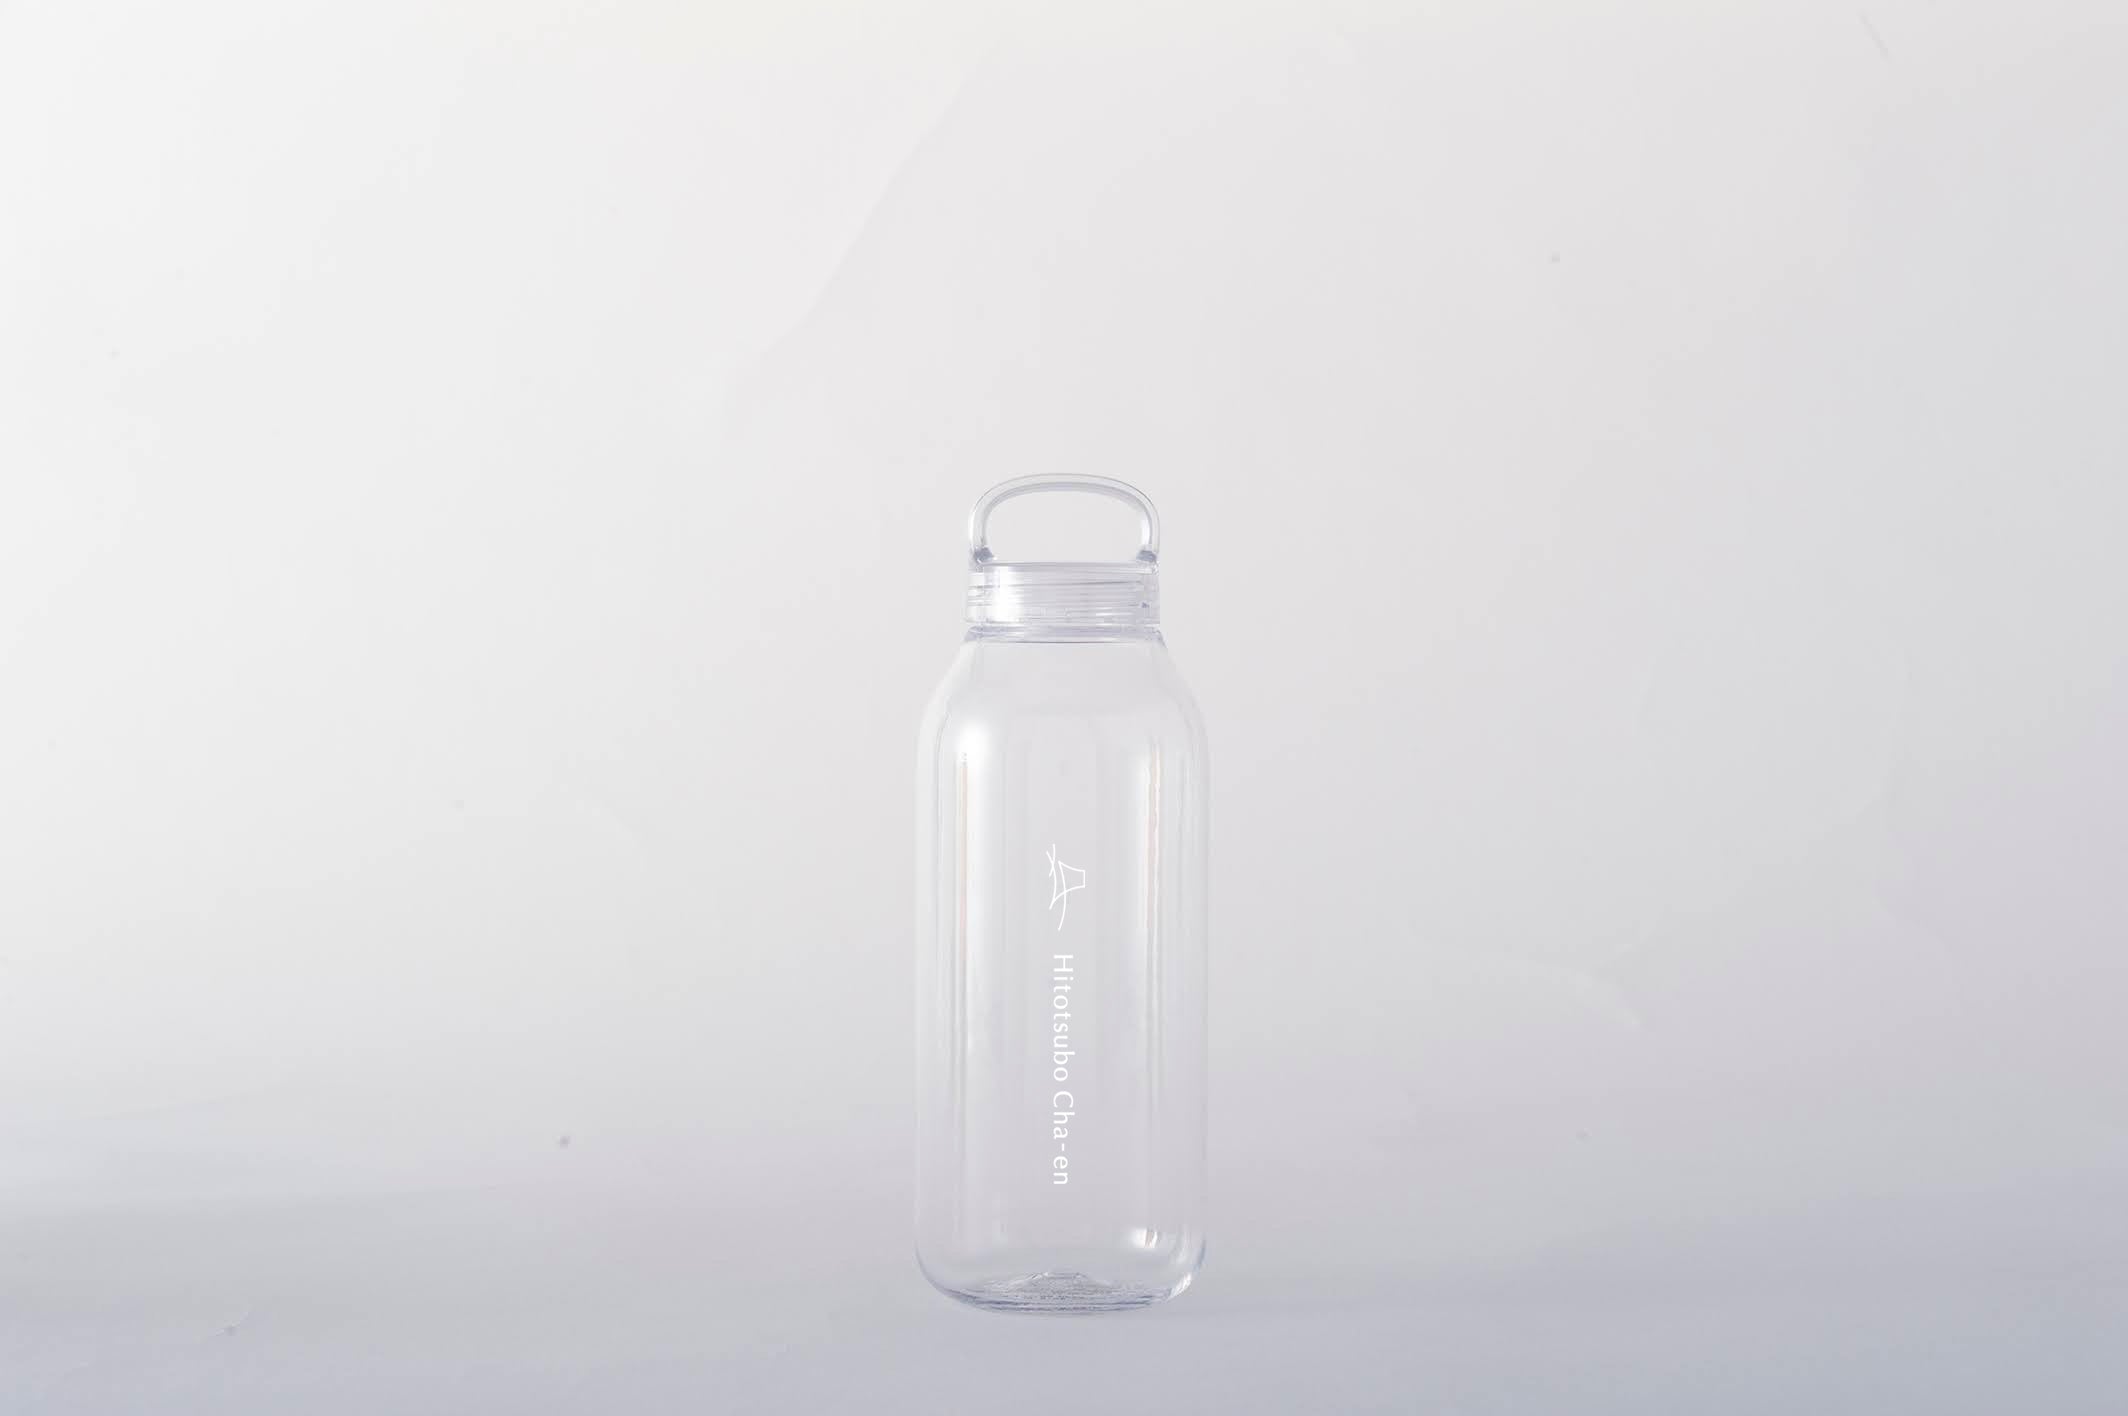 Itsubo Chaen Watering Life Starter Kit (Clear Bottle and Tea Set)